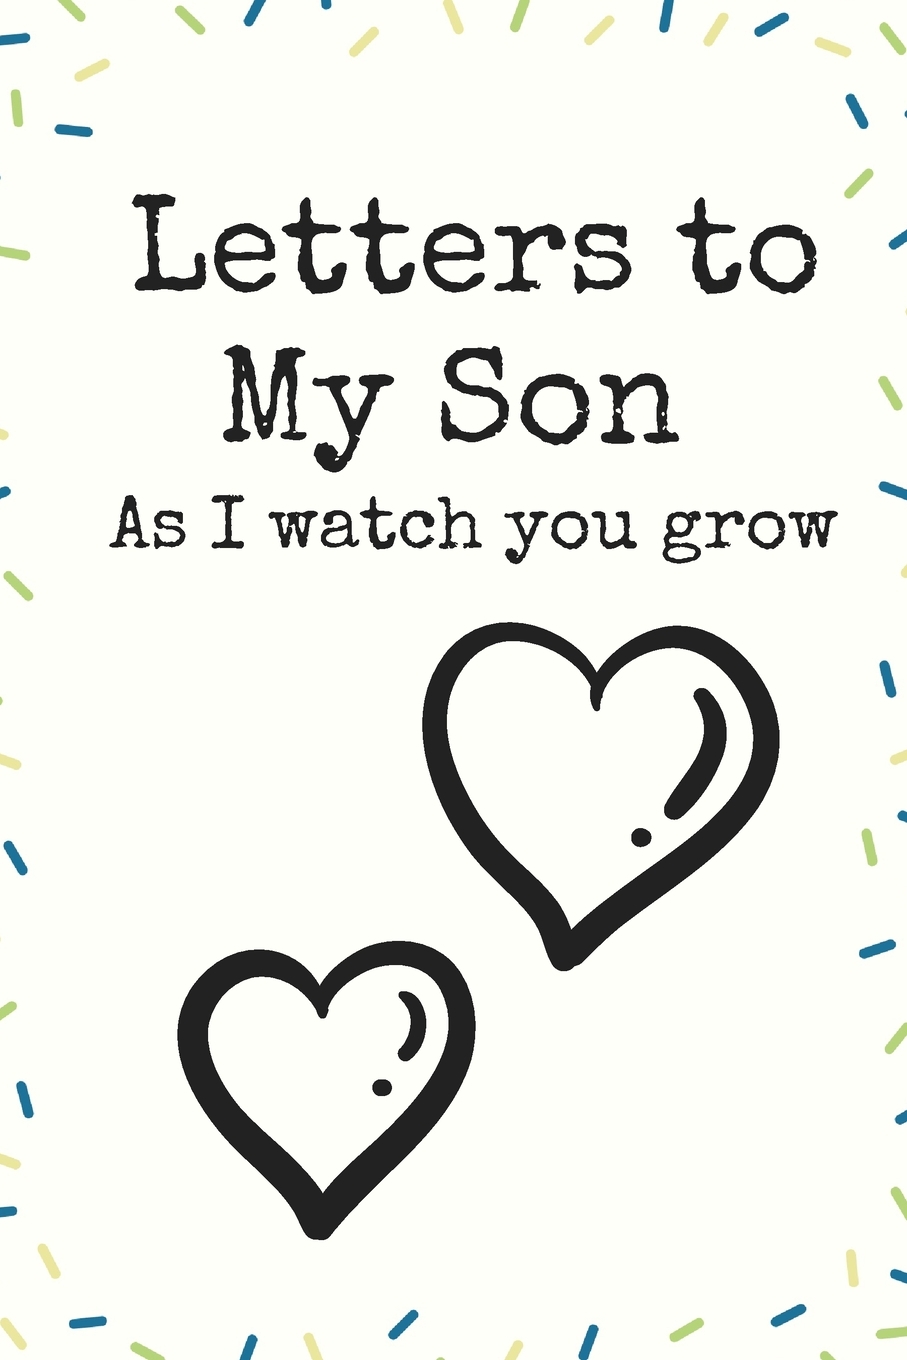 Letters to My Son as I Watch You Grow Heart Love Writing Journal a Beautiful: Lined Notebook / Journal Gift, 120 Pages, 6 X 9 Inches, Personal Diary, Personalized Journal, Customized Journal, the Diary (Paperback) - image 1 of 1